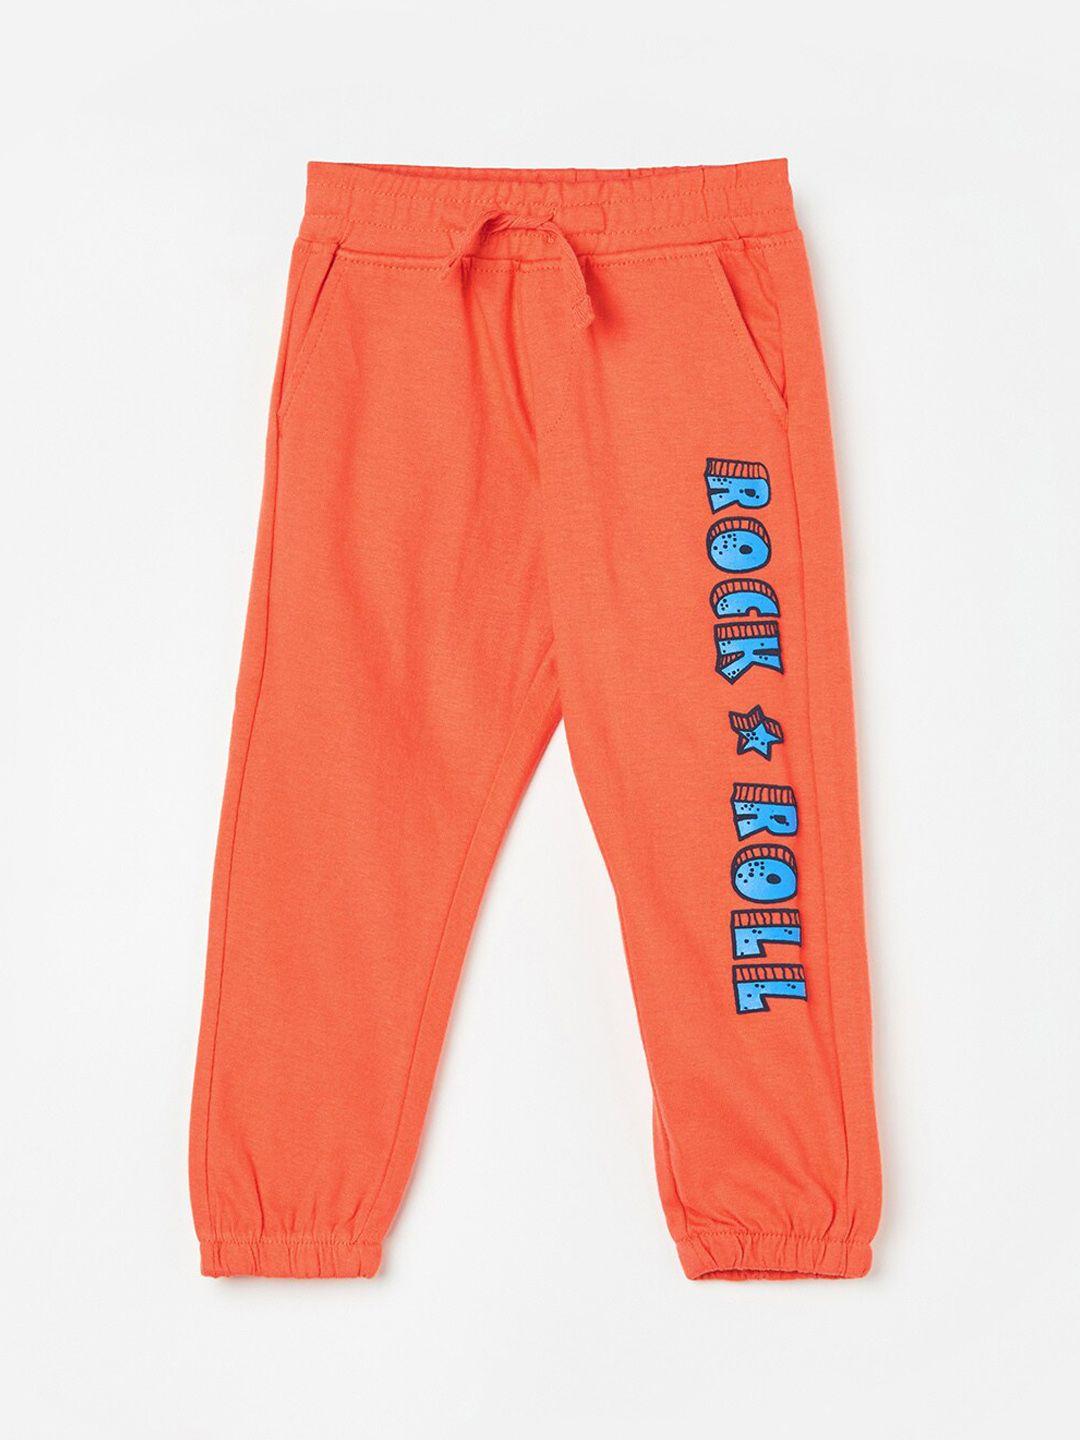 juniors by lifestyle boys typography printed pure cotton cotton track pants